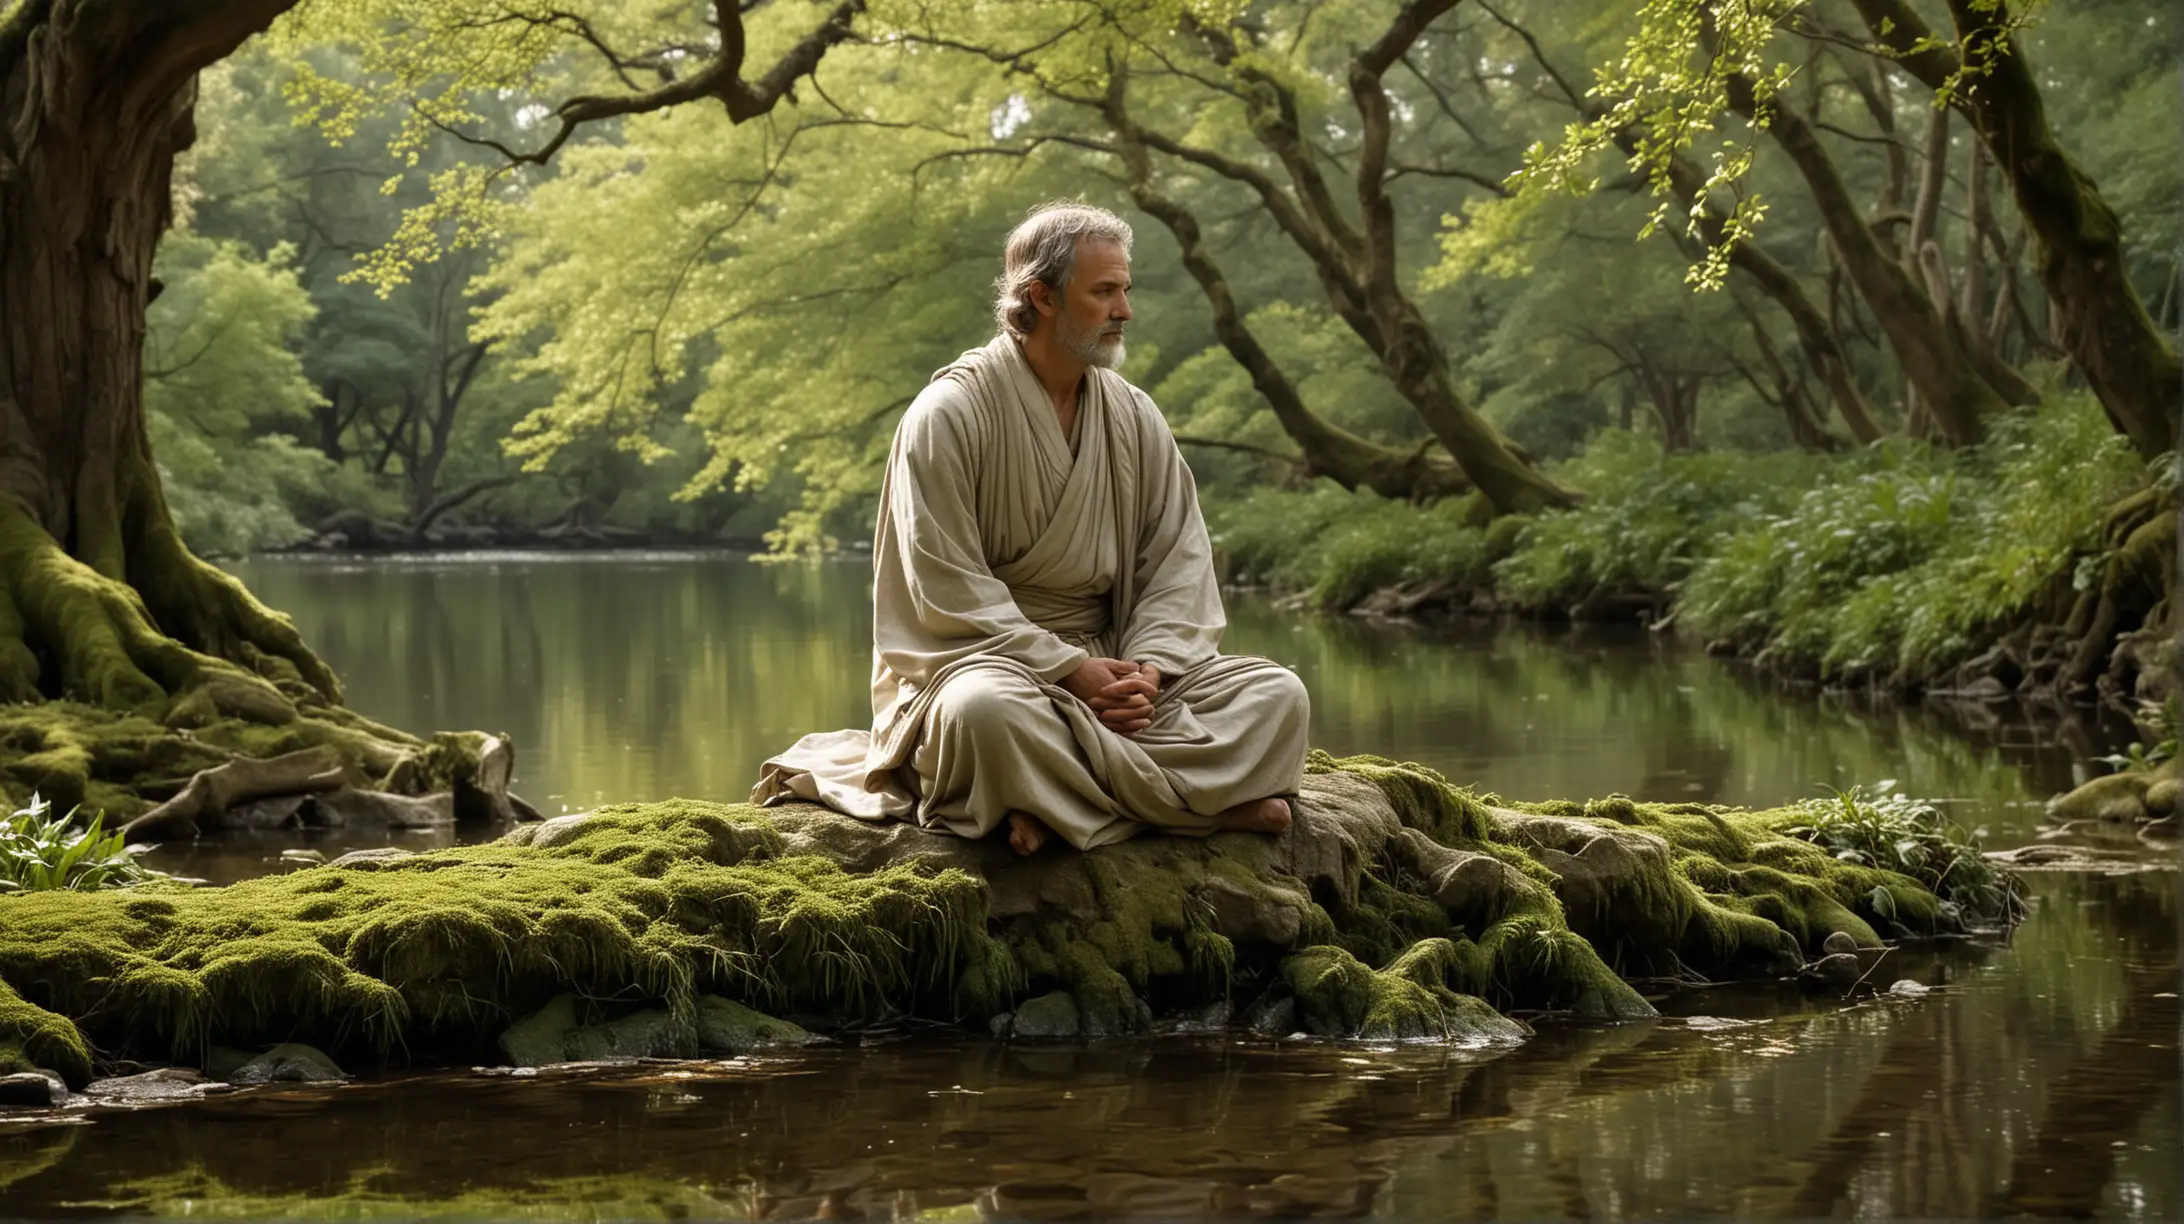 General Visualization Prompt: Visualize a stoic philosopher, with a lean and muscular build, sitting in a serene setting, perhaps by a tranquil lake or under a grand oak tree. He is deep in thought, contemplating the principles of virtue and the control of passions according to stoic philosophy.

Image Description: The image shows a stoic philosopher sitting cross-legged on a moss-covered rock beside a gently flowing stream. He is dressed in simple, flowing robes, with a physique that speaks of physical strength and inner discipline. His eyes are closed in introspection, his brow furrowed in deep concentration as he contemplates the nature of virtue and the path to inner peace.